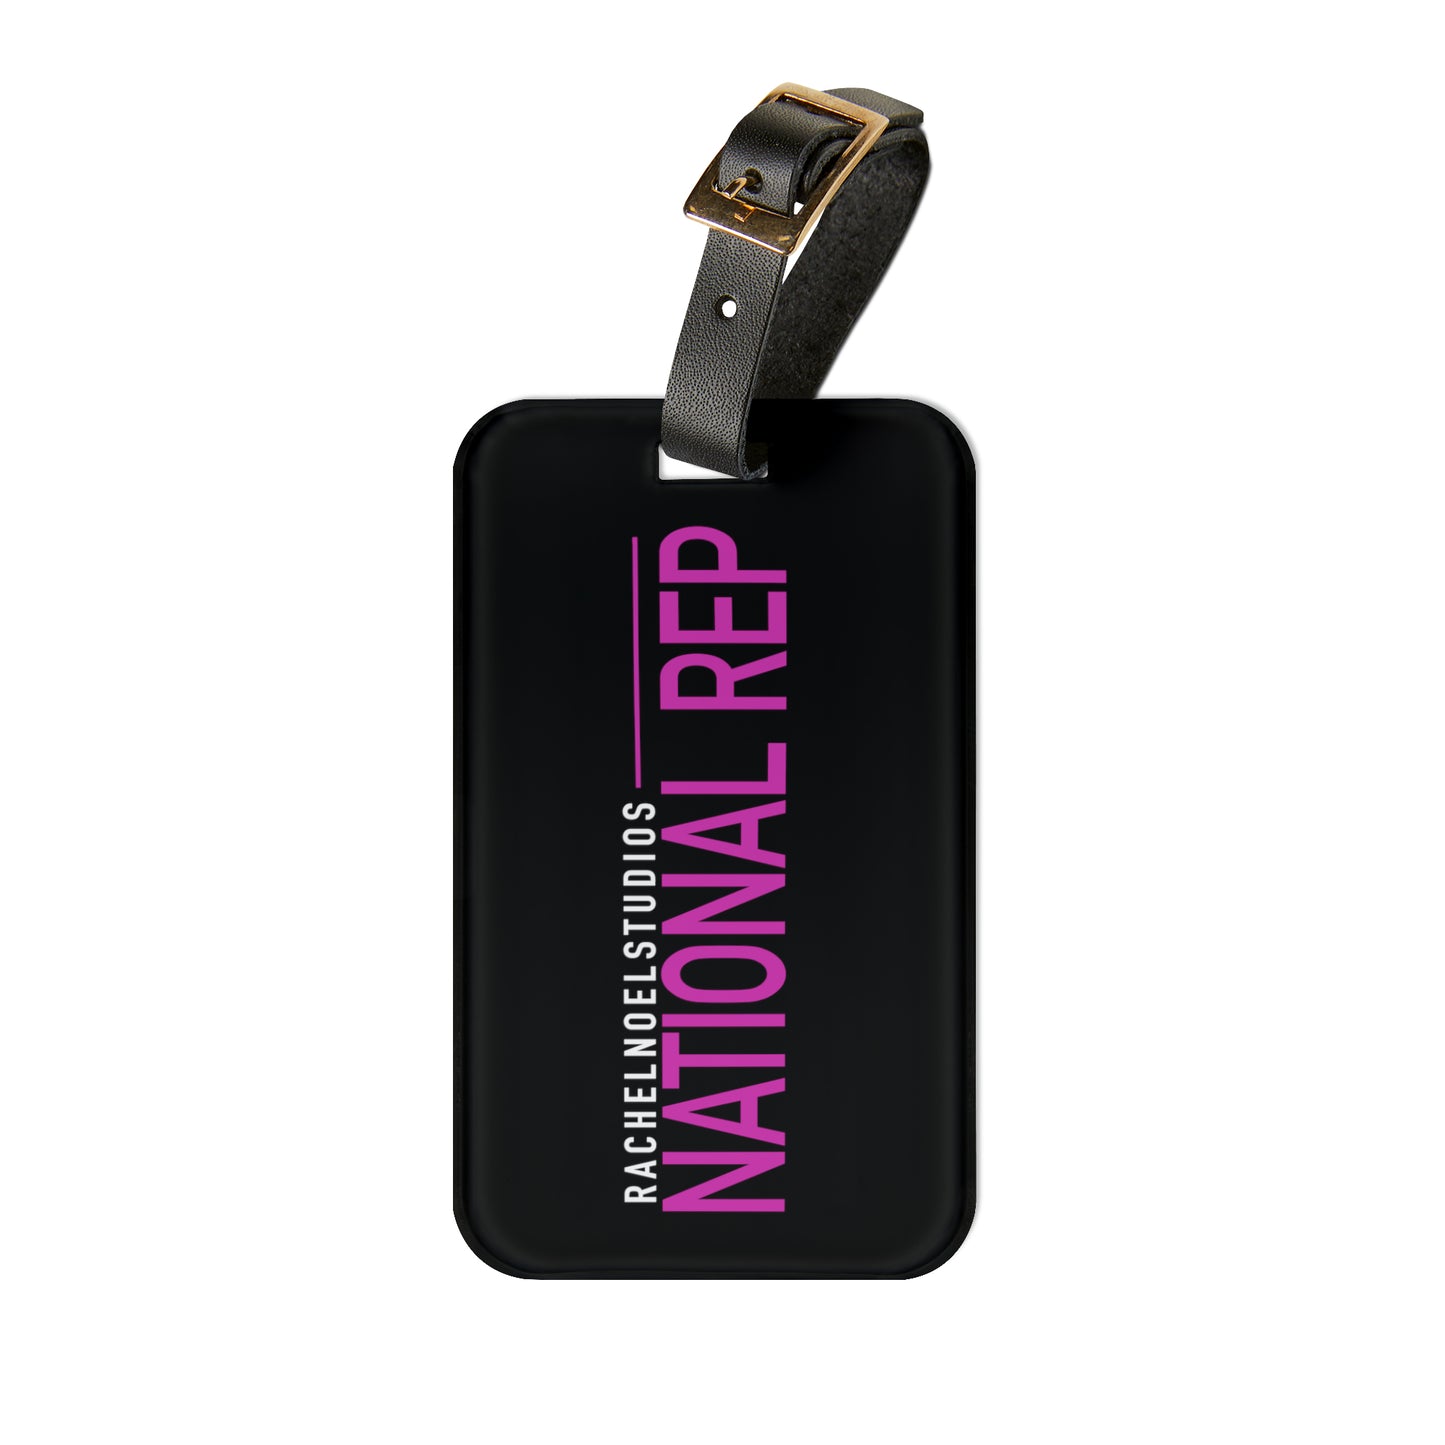 “National Rep” Luggage Tag